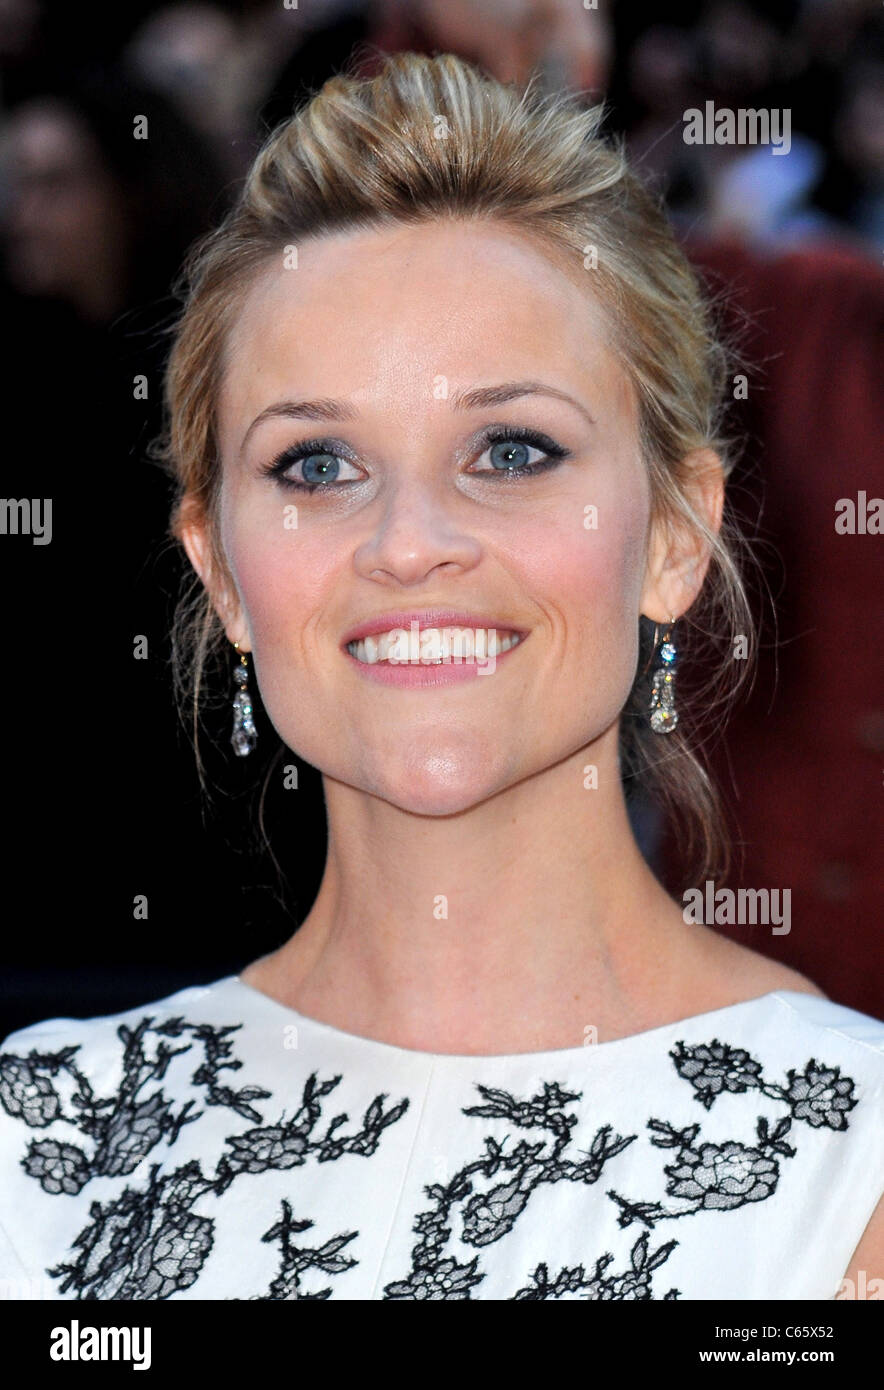 Reese Witherspoon at arrivals for WATER FOR ELEPHANTS Premiere, The Ziegfeld Theatre, New York, NY April 17, 2011. Photo By: Gregorio T. Binuya/Everett Collection Stock Photo